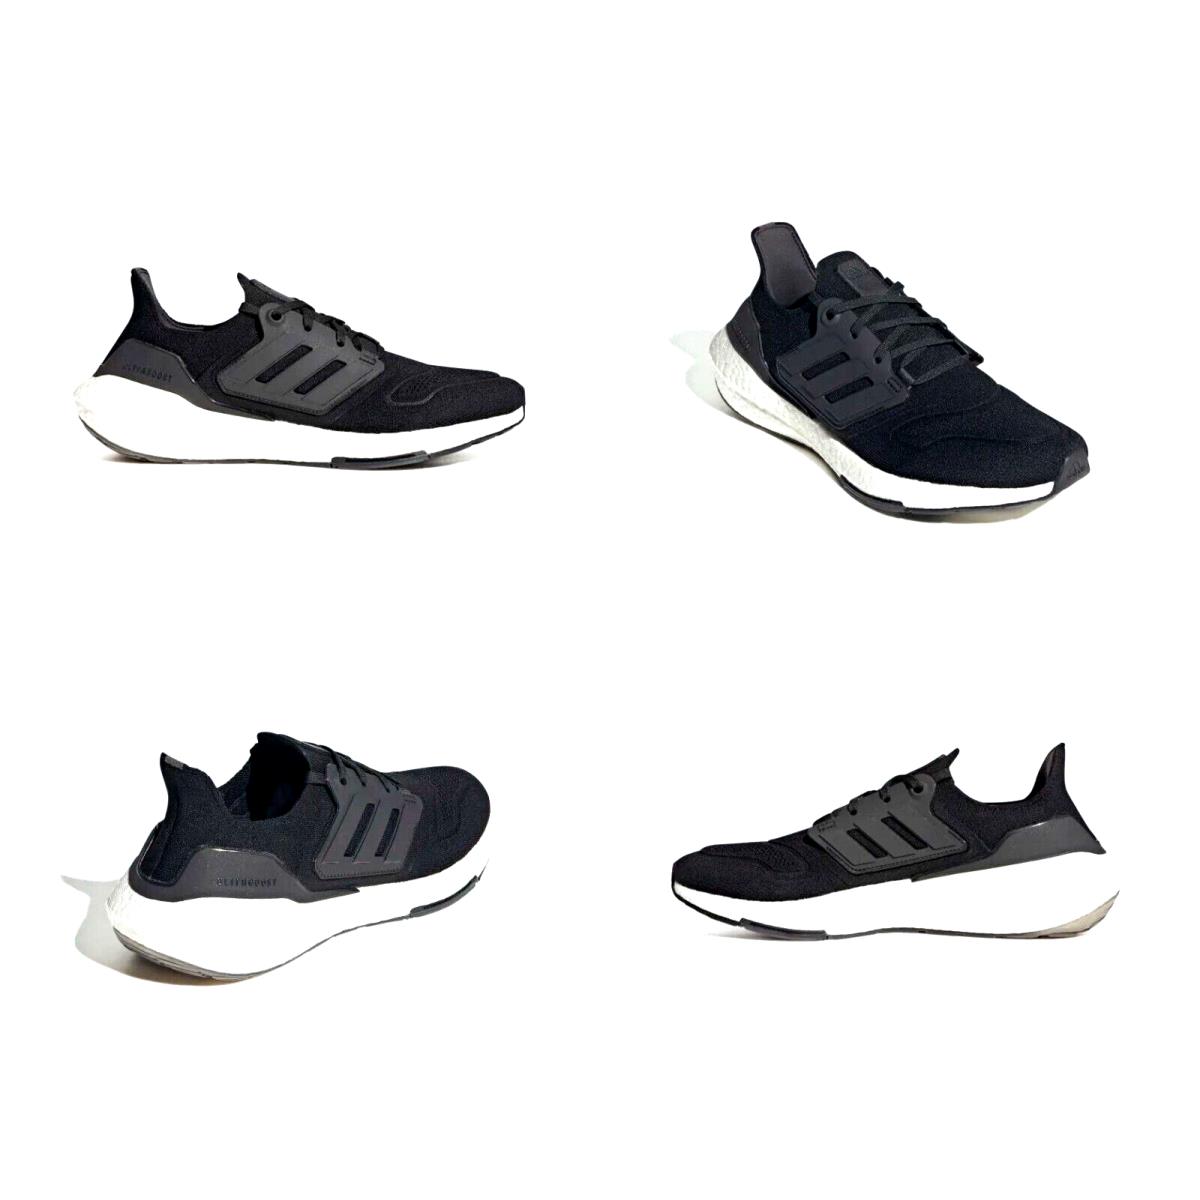 Adidas Ultraboost 22 Black White Boost Running Shoes Mens Size 11 US GX3062